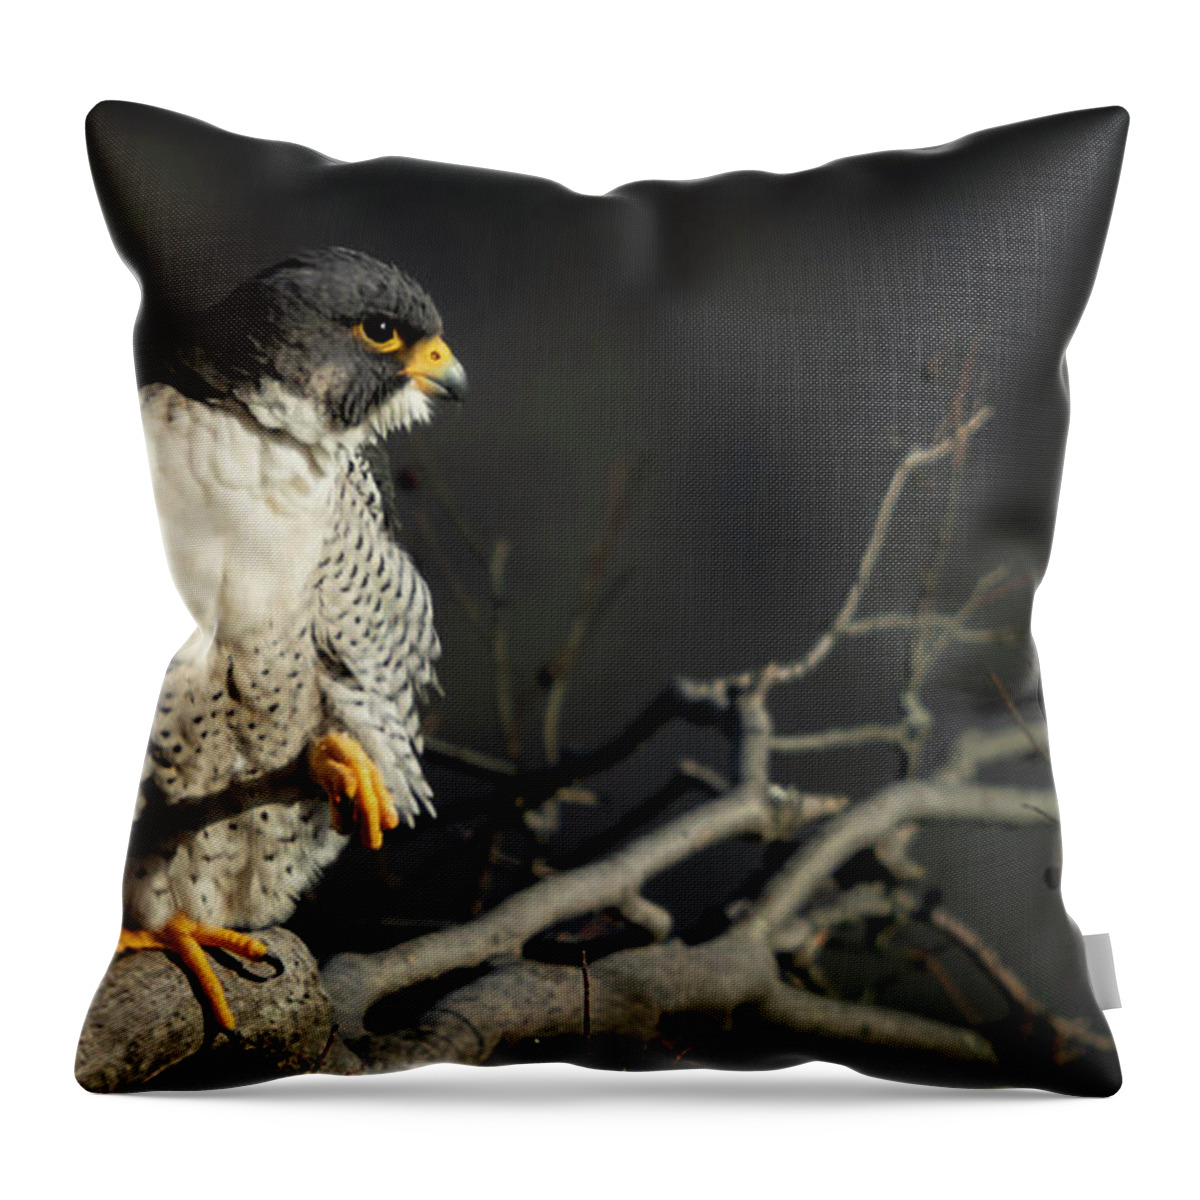 Falcon Throw Pillow featuring the photograph Eye of Steel by Alyssa Tumale